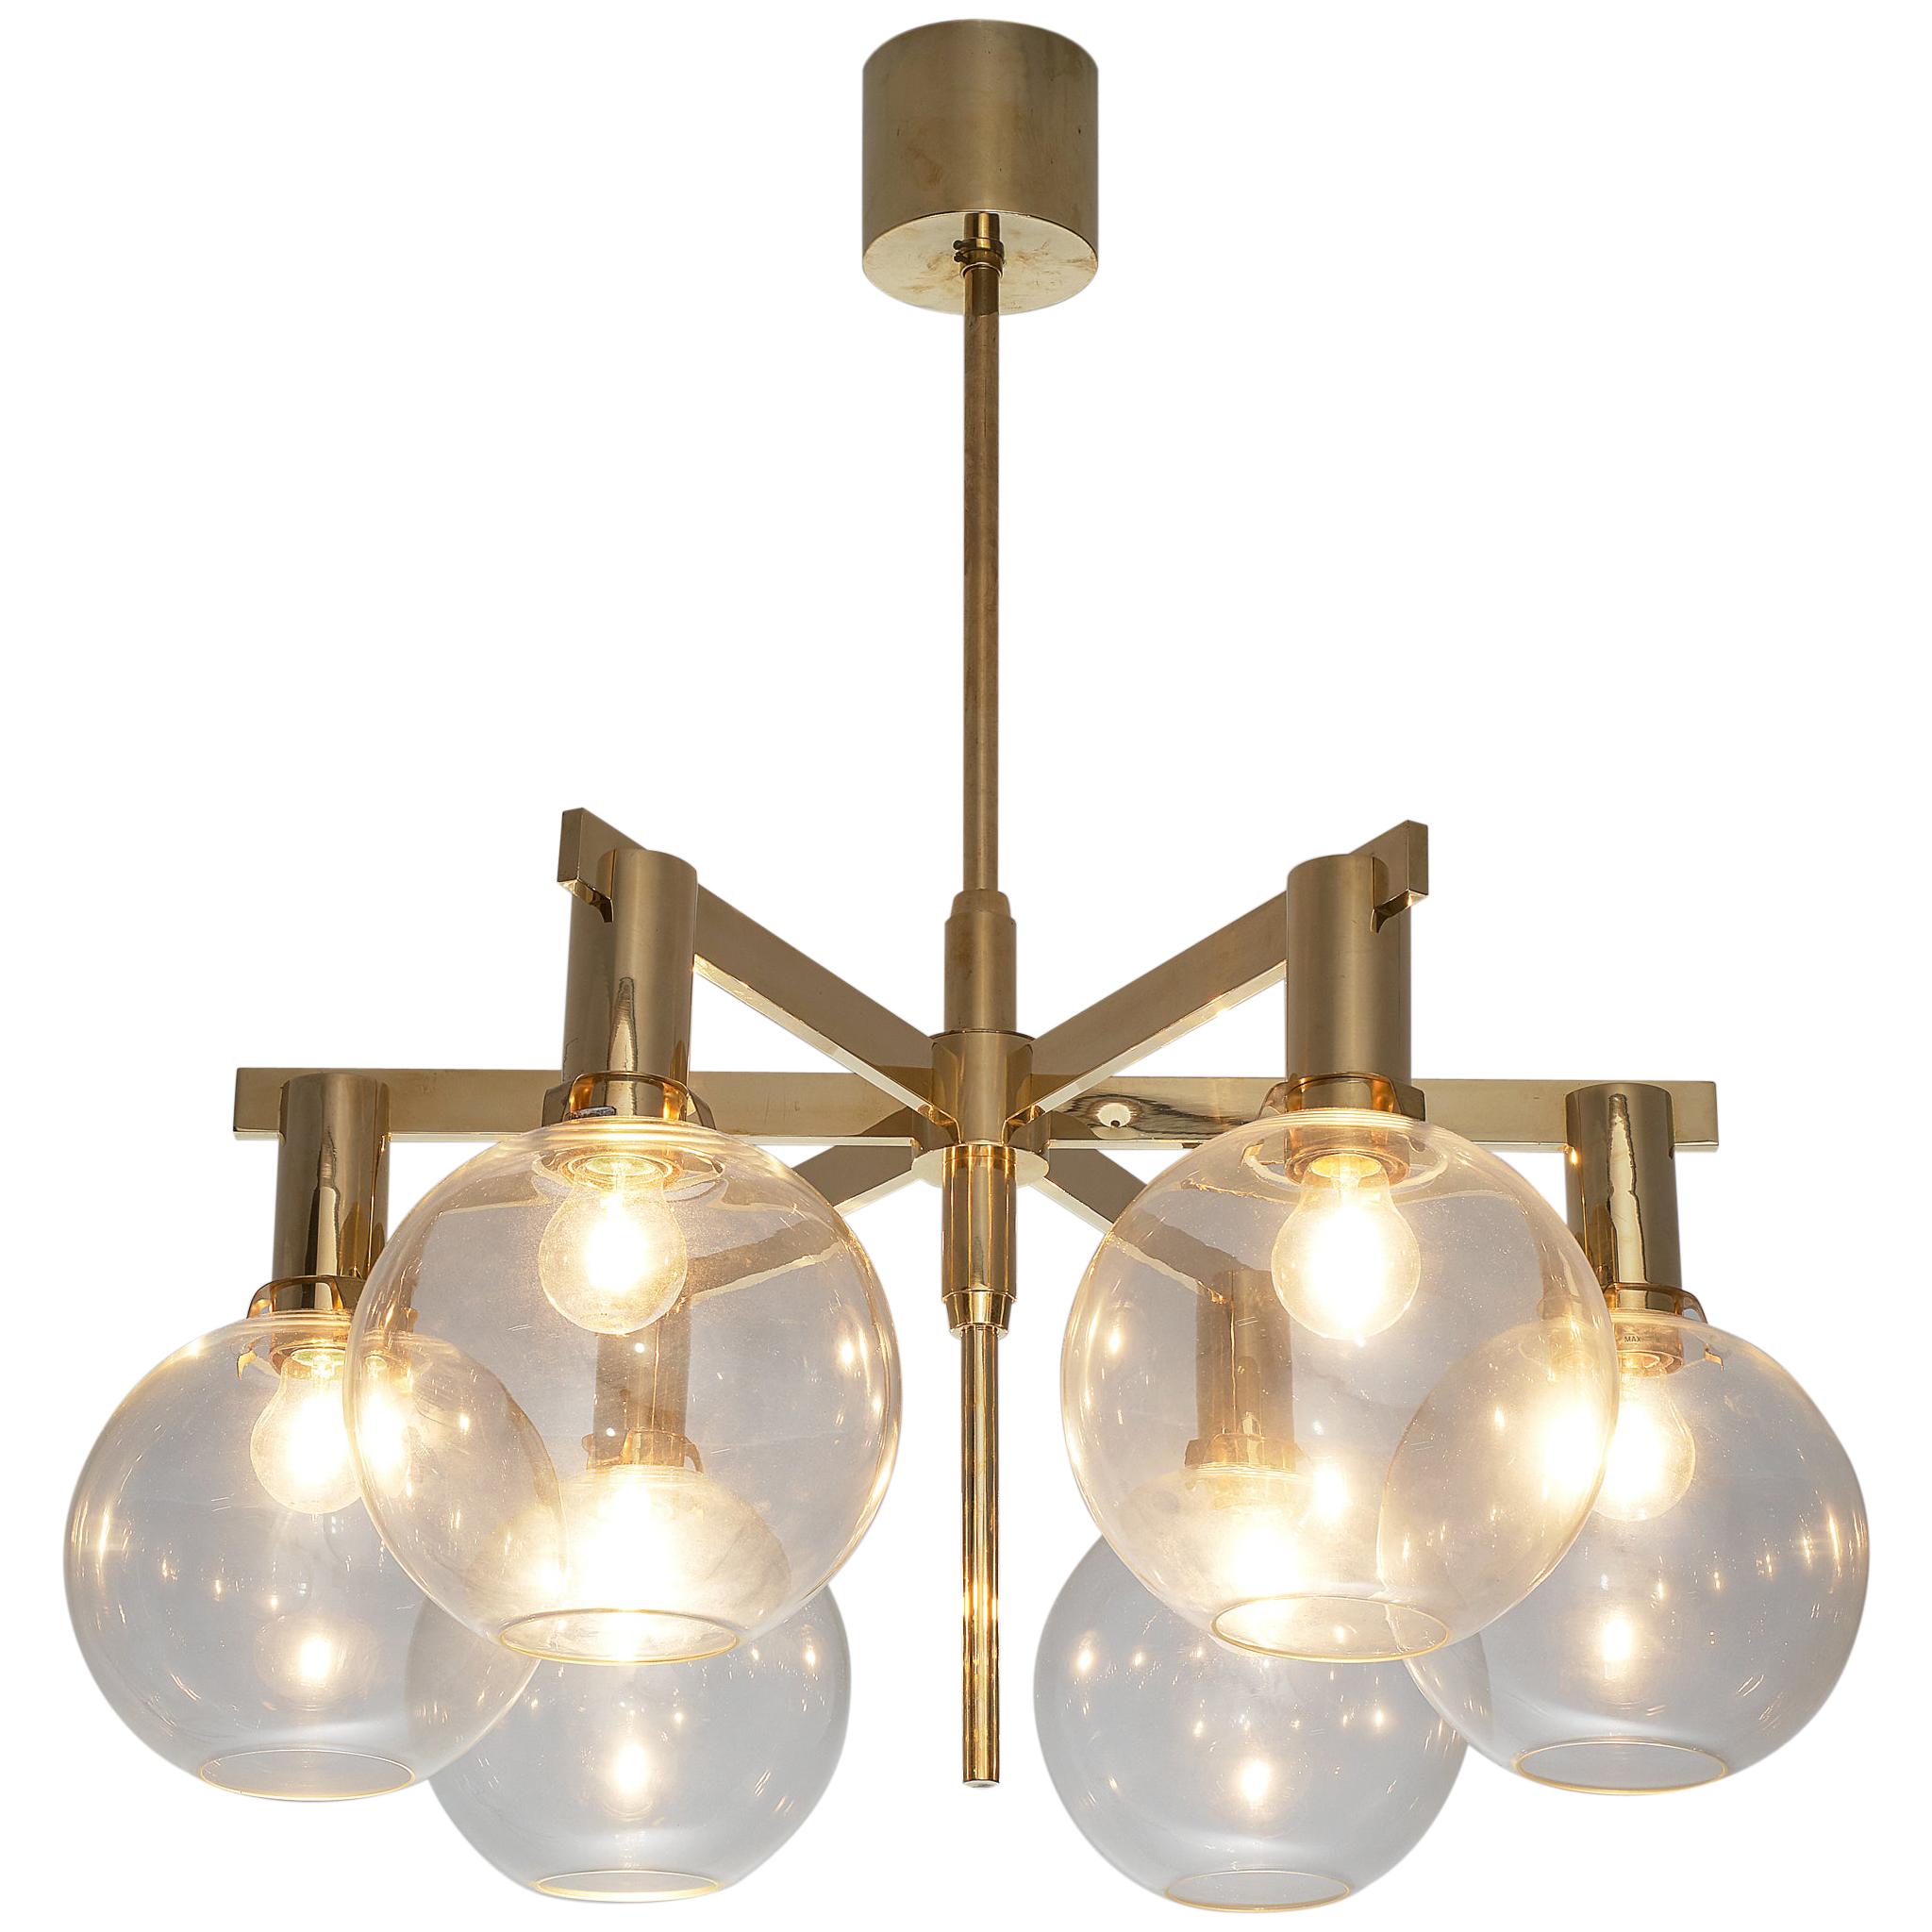 Hans-Agne Jakobsson 'Pastoral' Chandelier in Glass and Brass